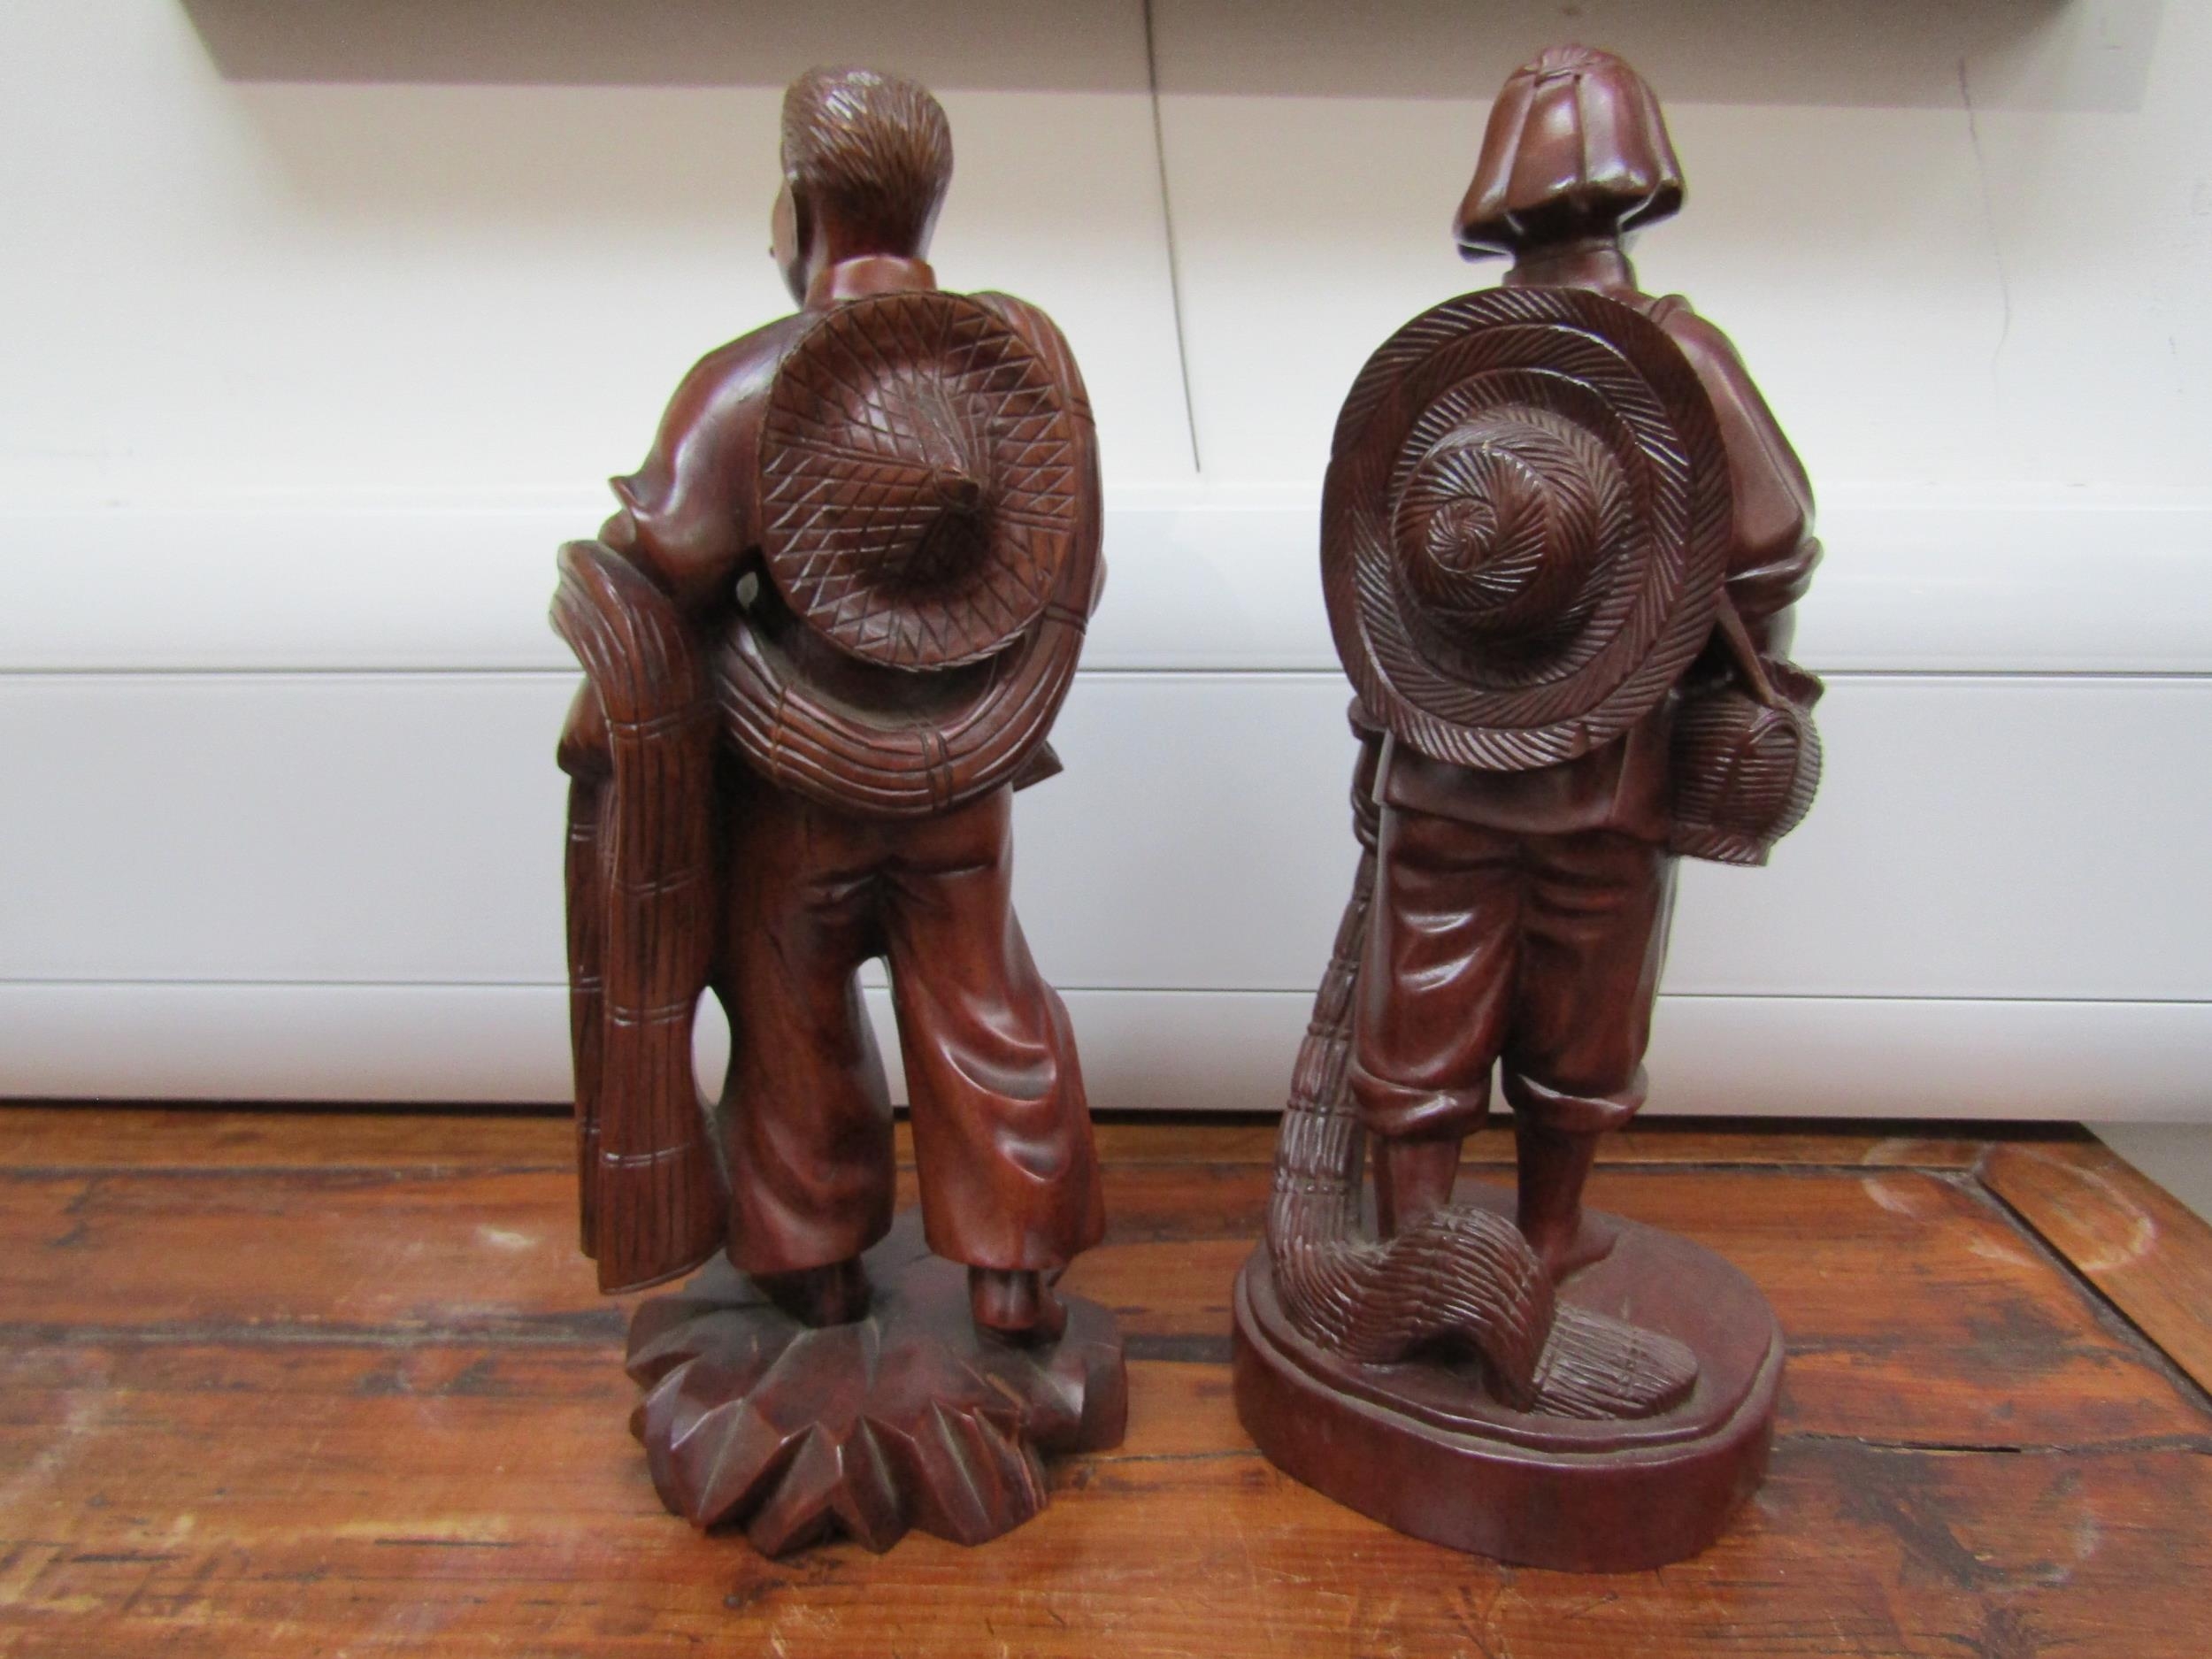 Eastern carved wood figures, 27cm tall - Image 2 of 3